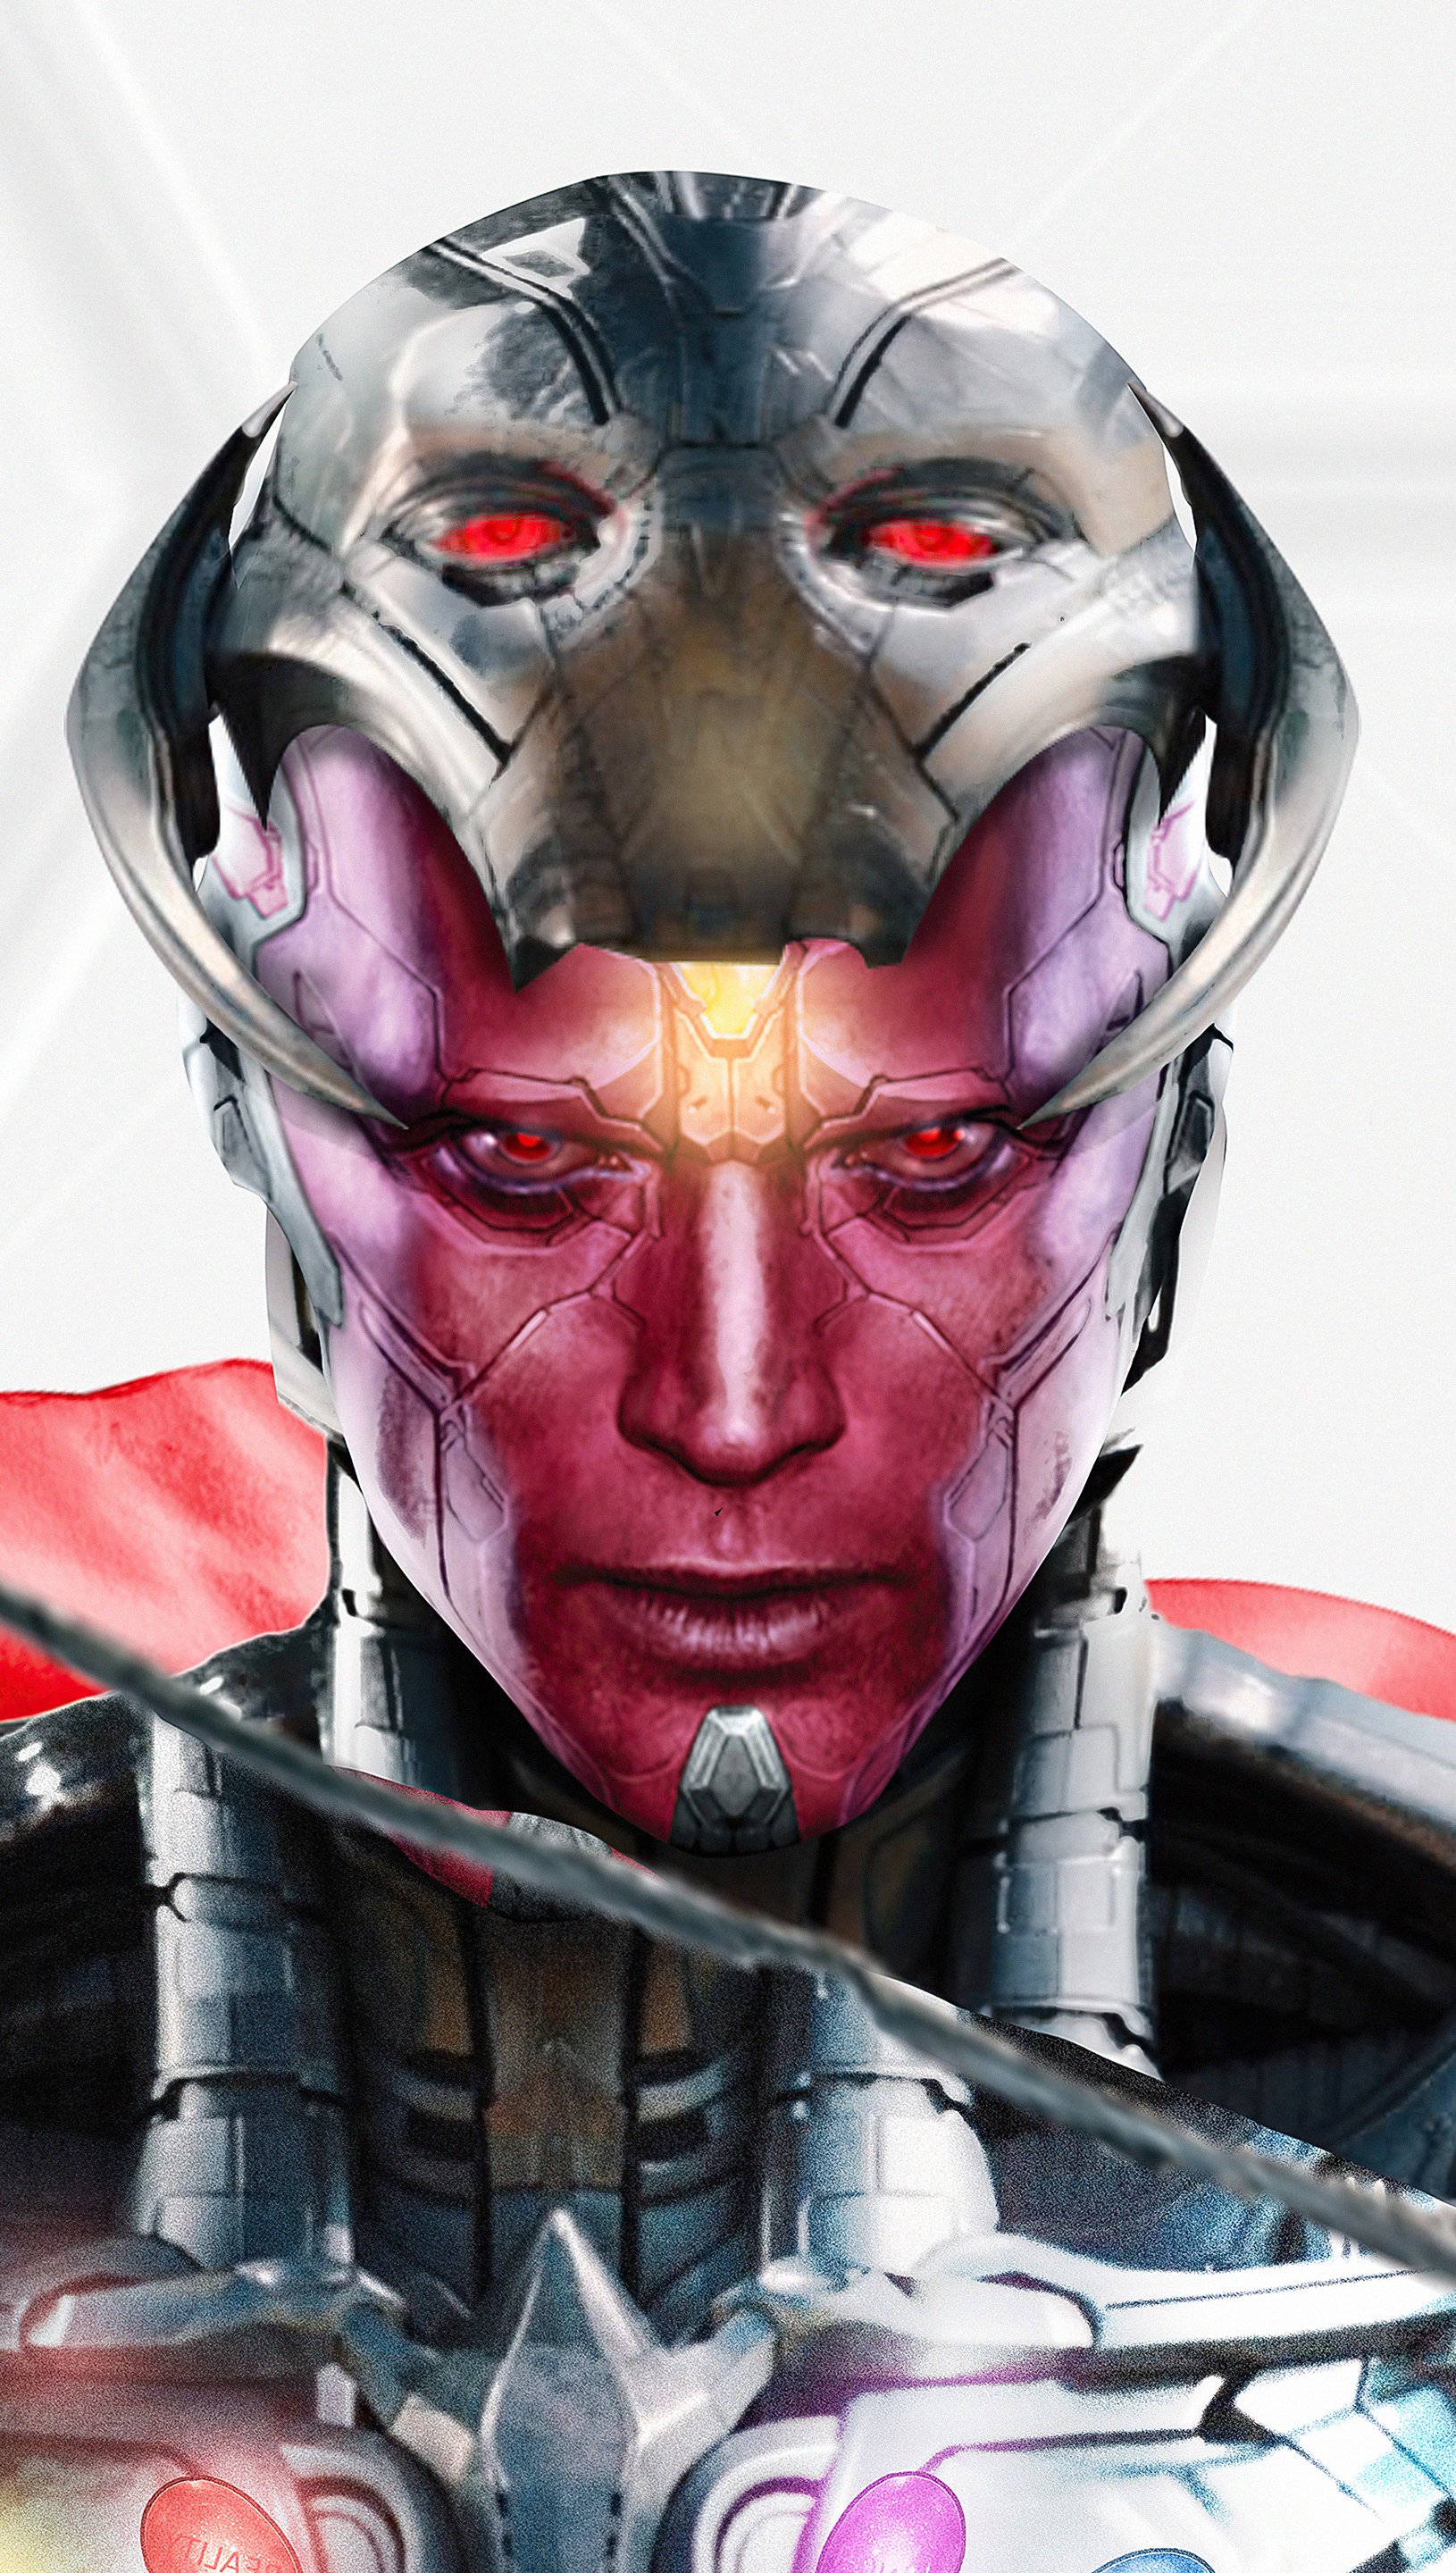 What If Ultron Won Wallpapers